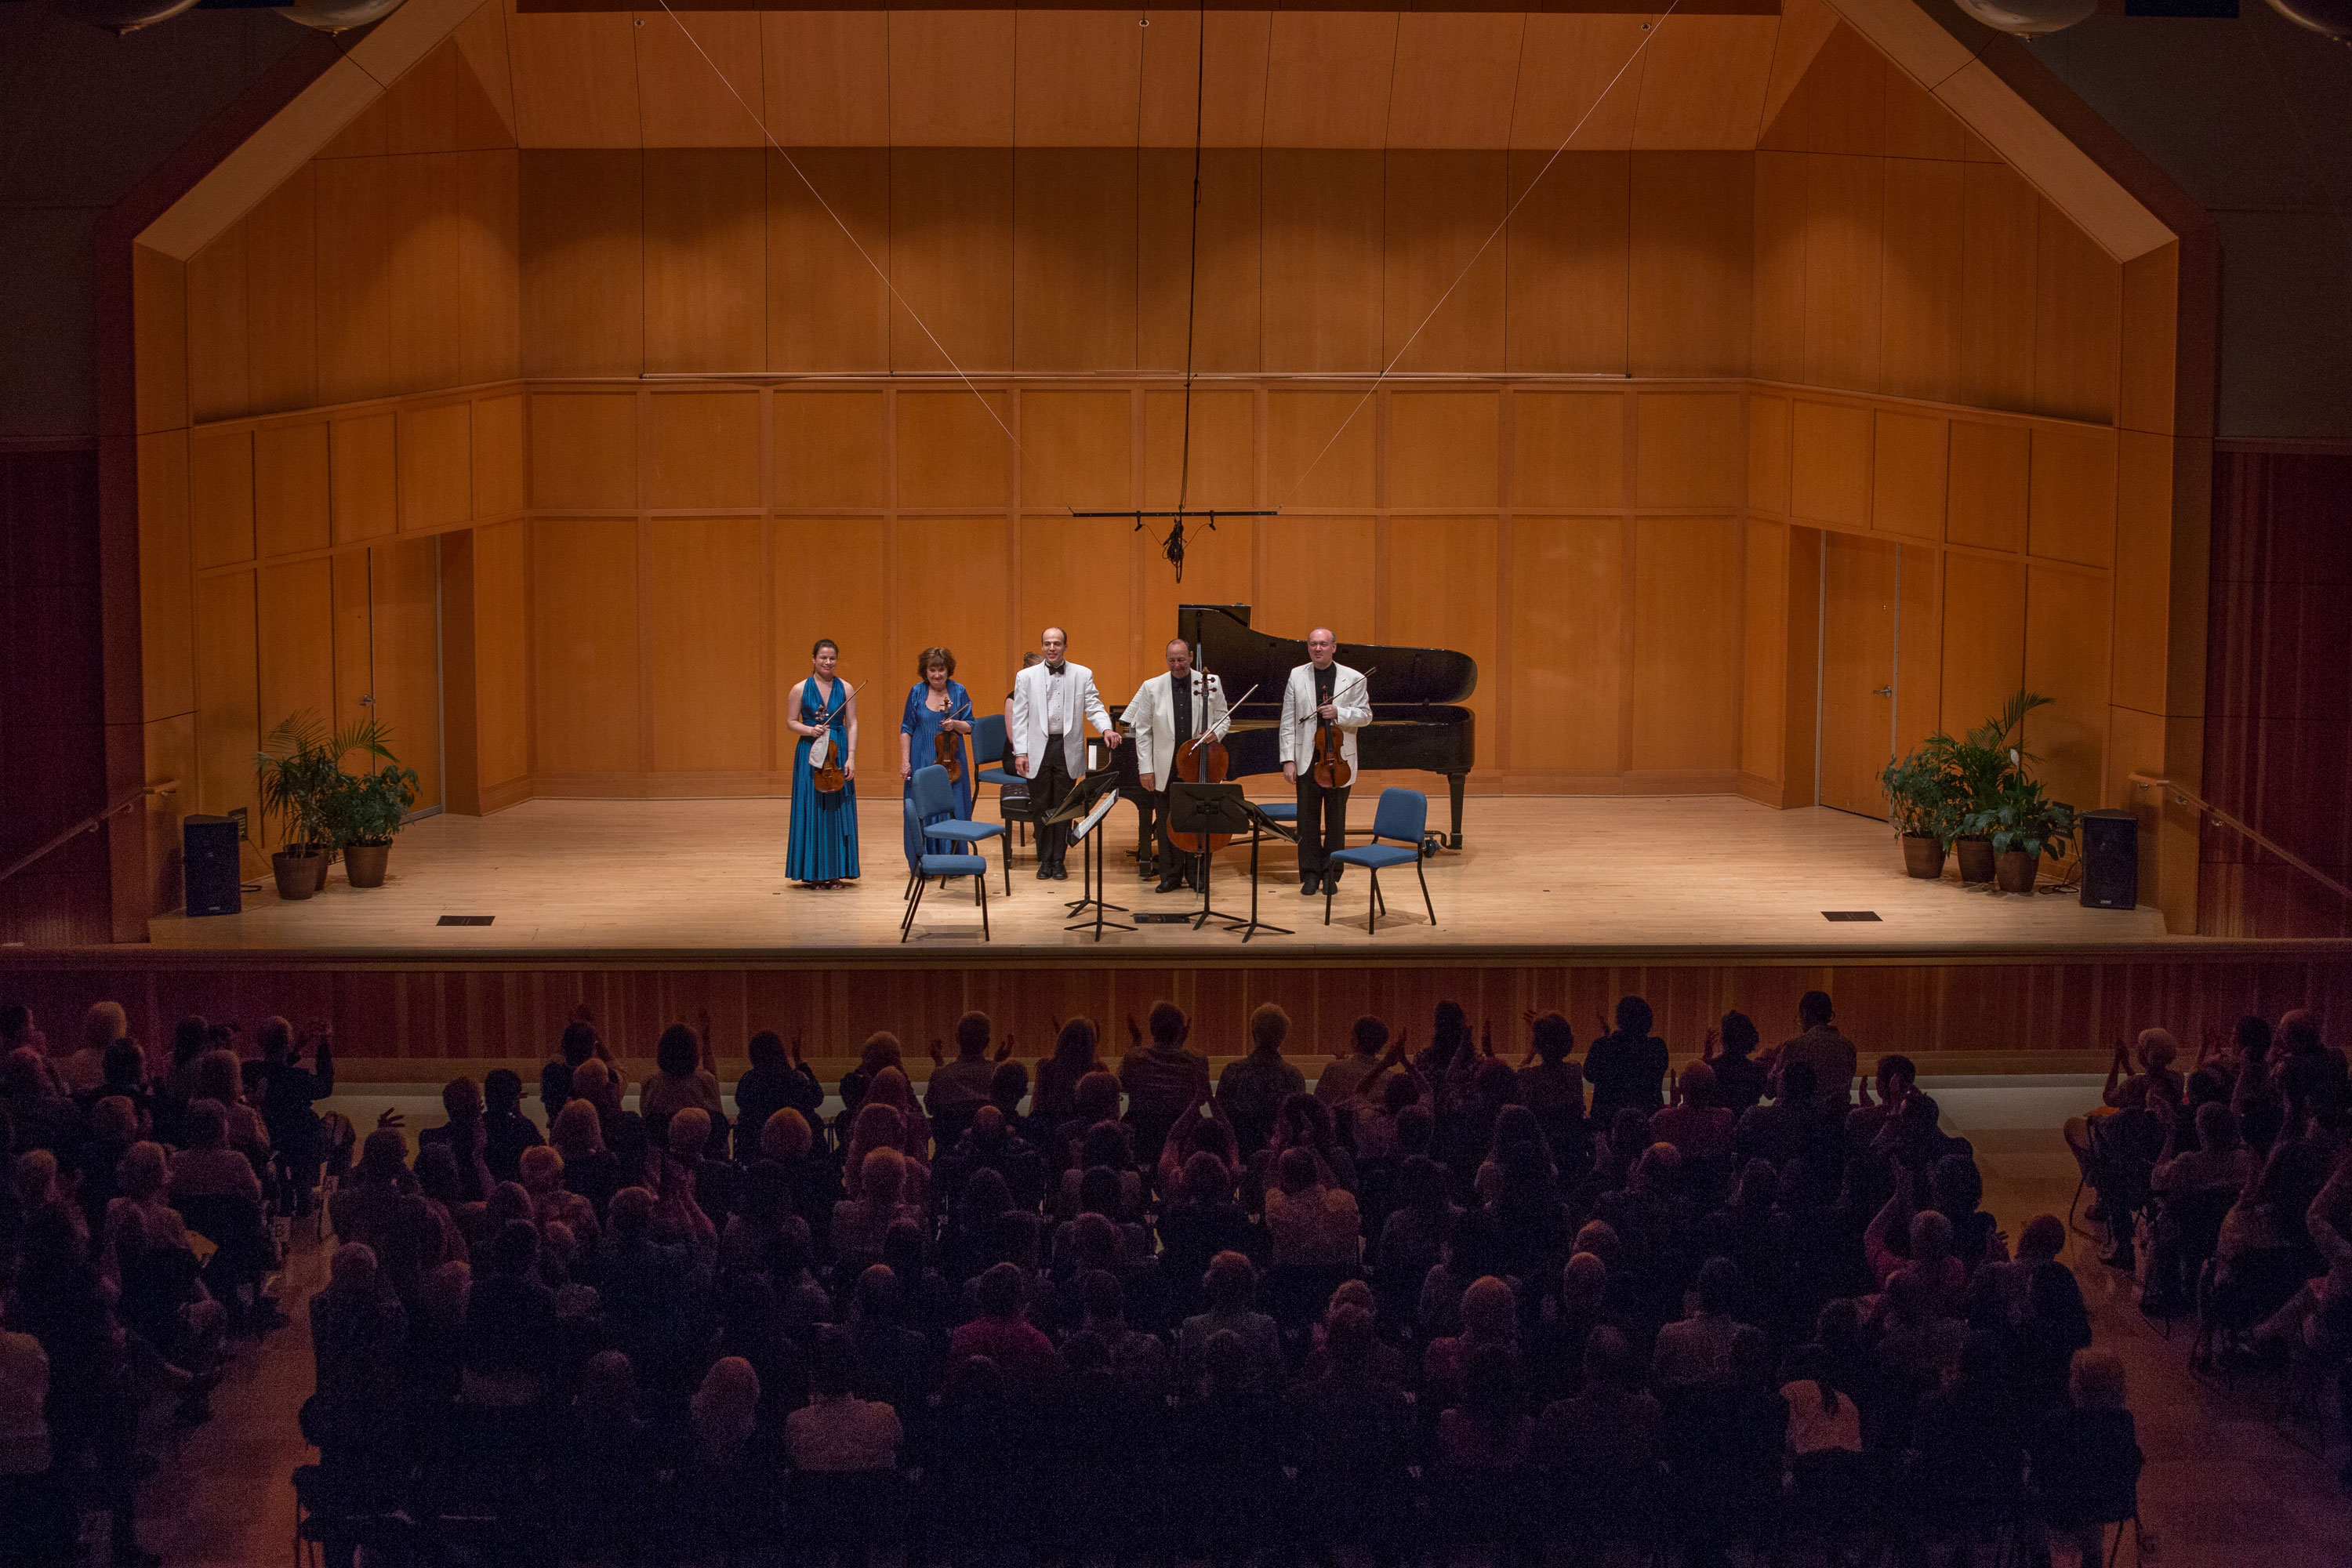 Five chamber players on stage with a grand piano